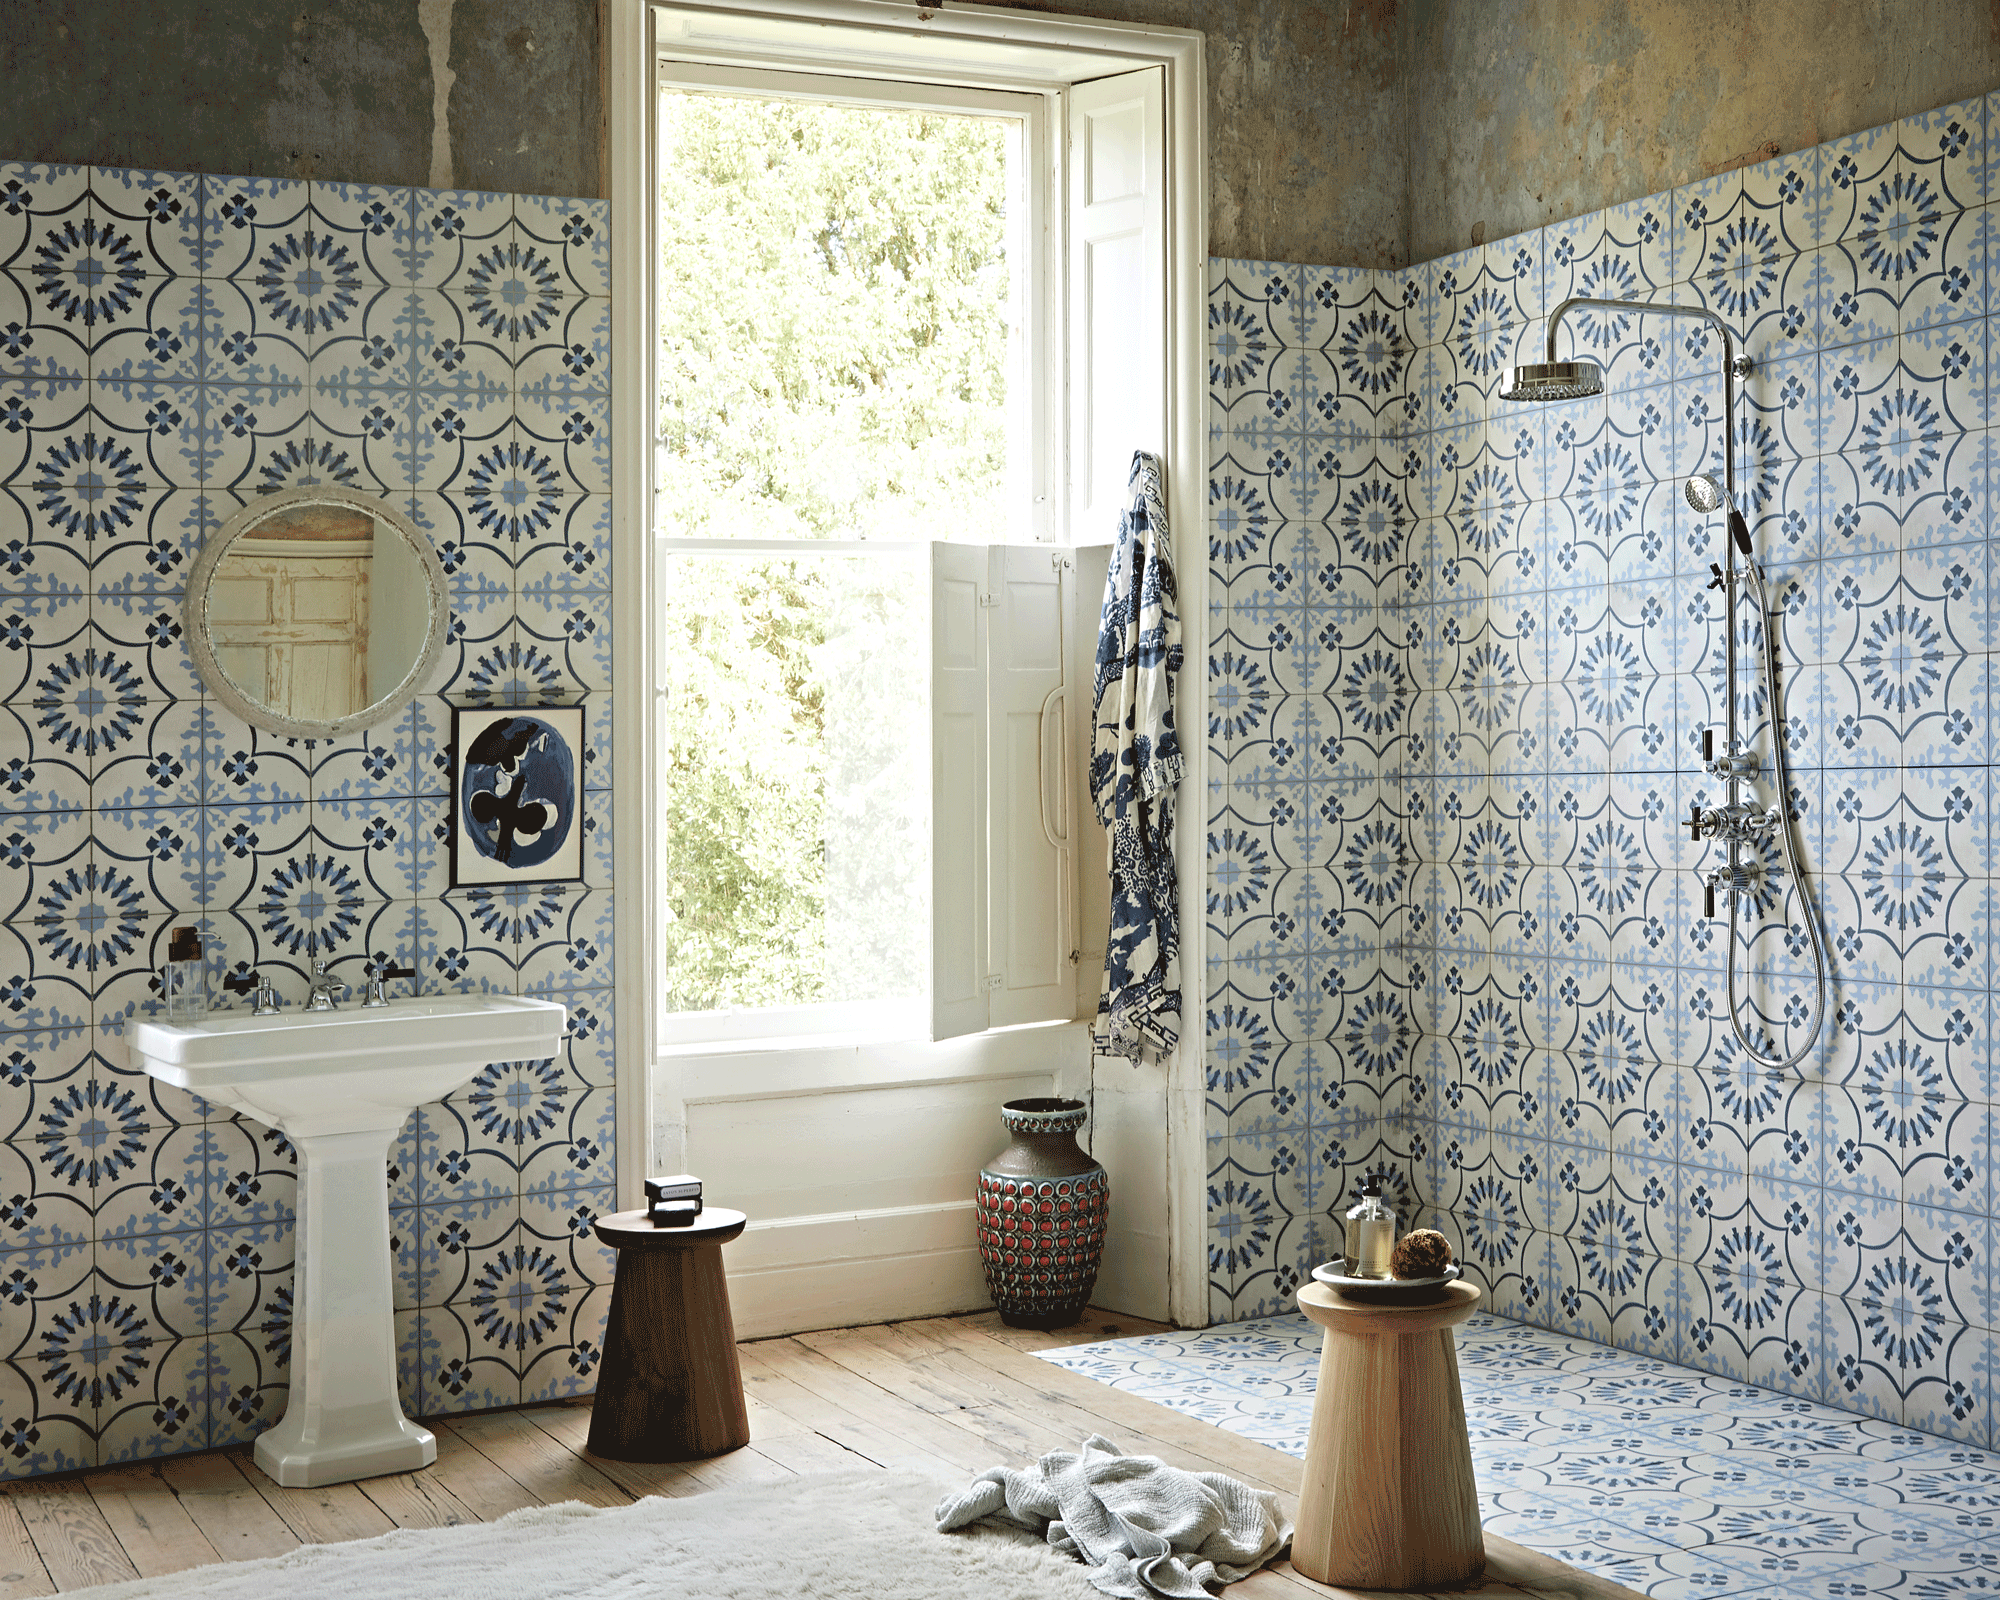 wet room with blue patterned tiles on walls and floor